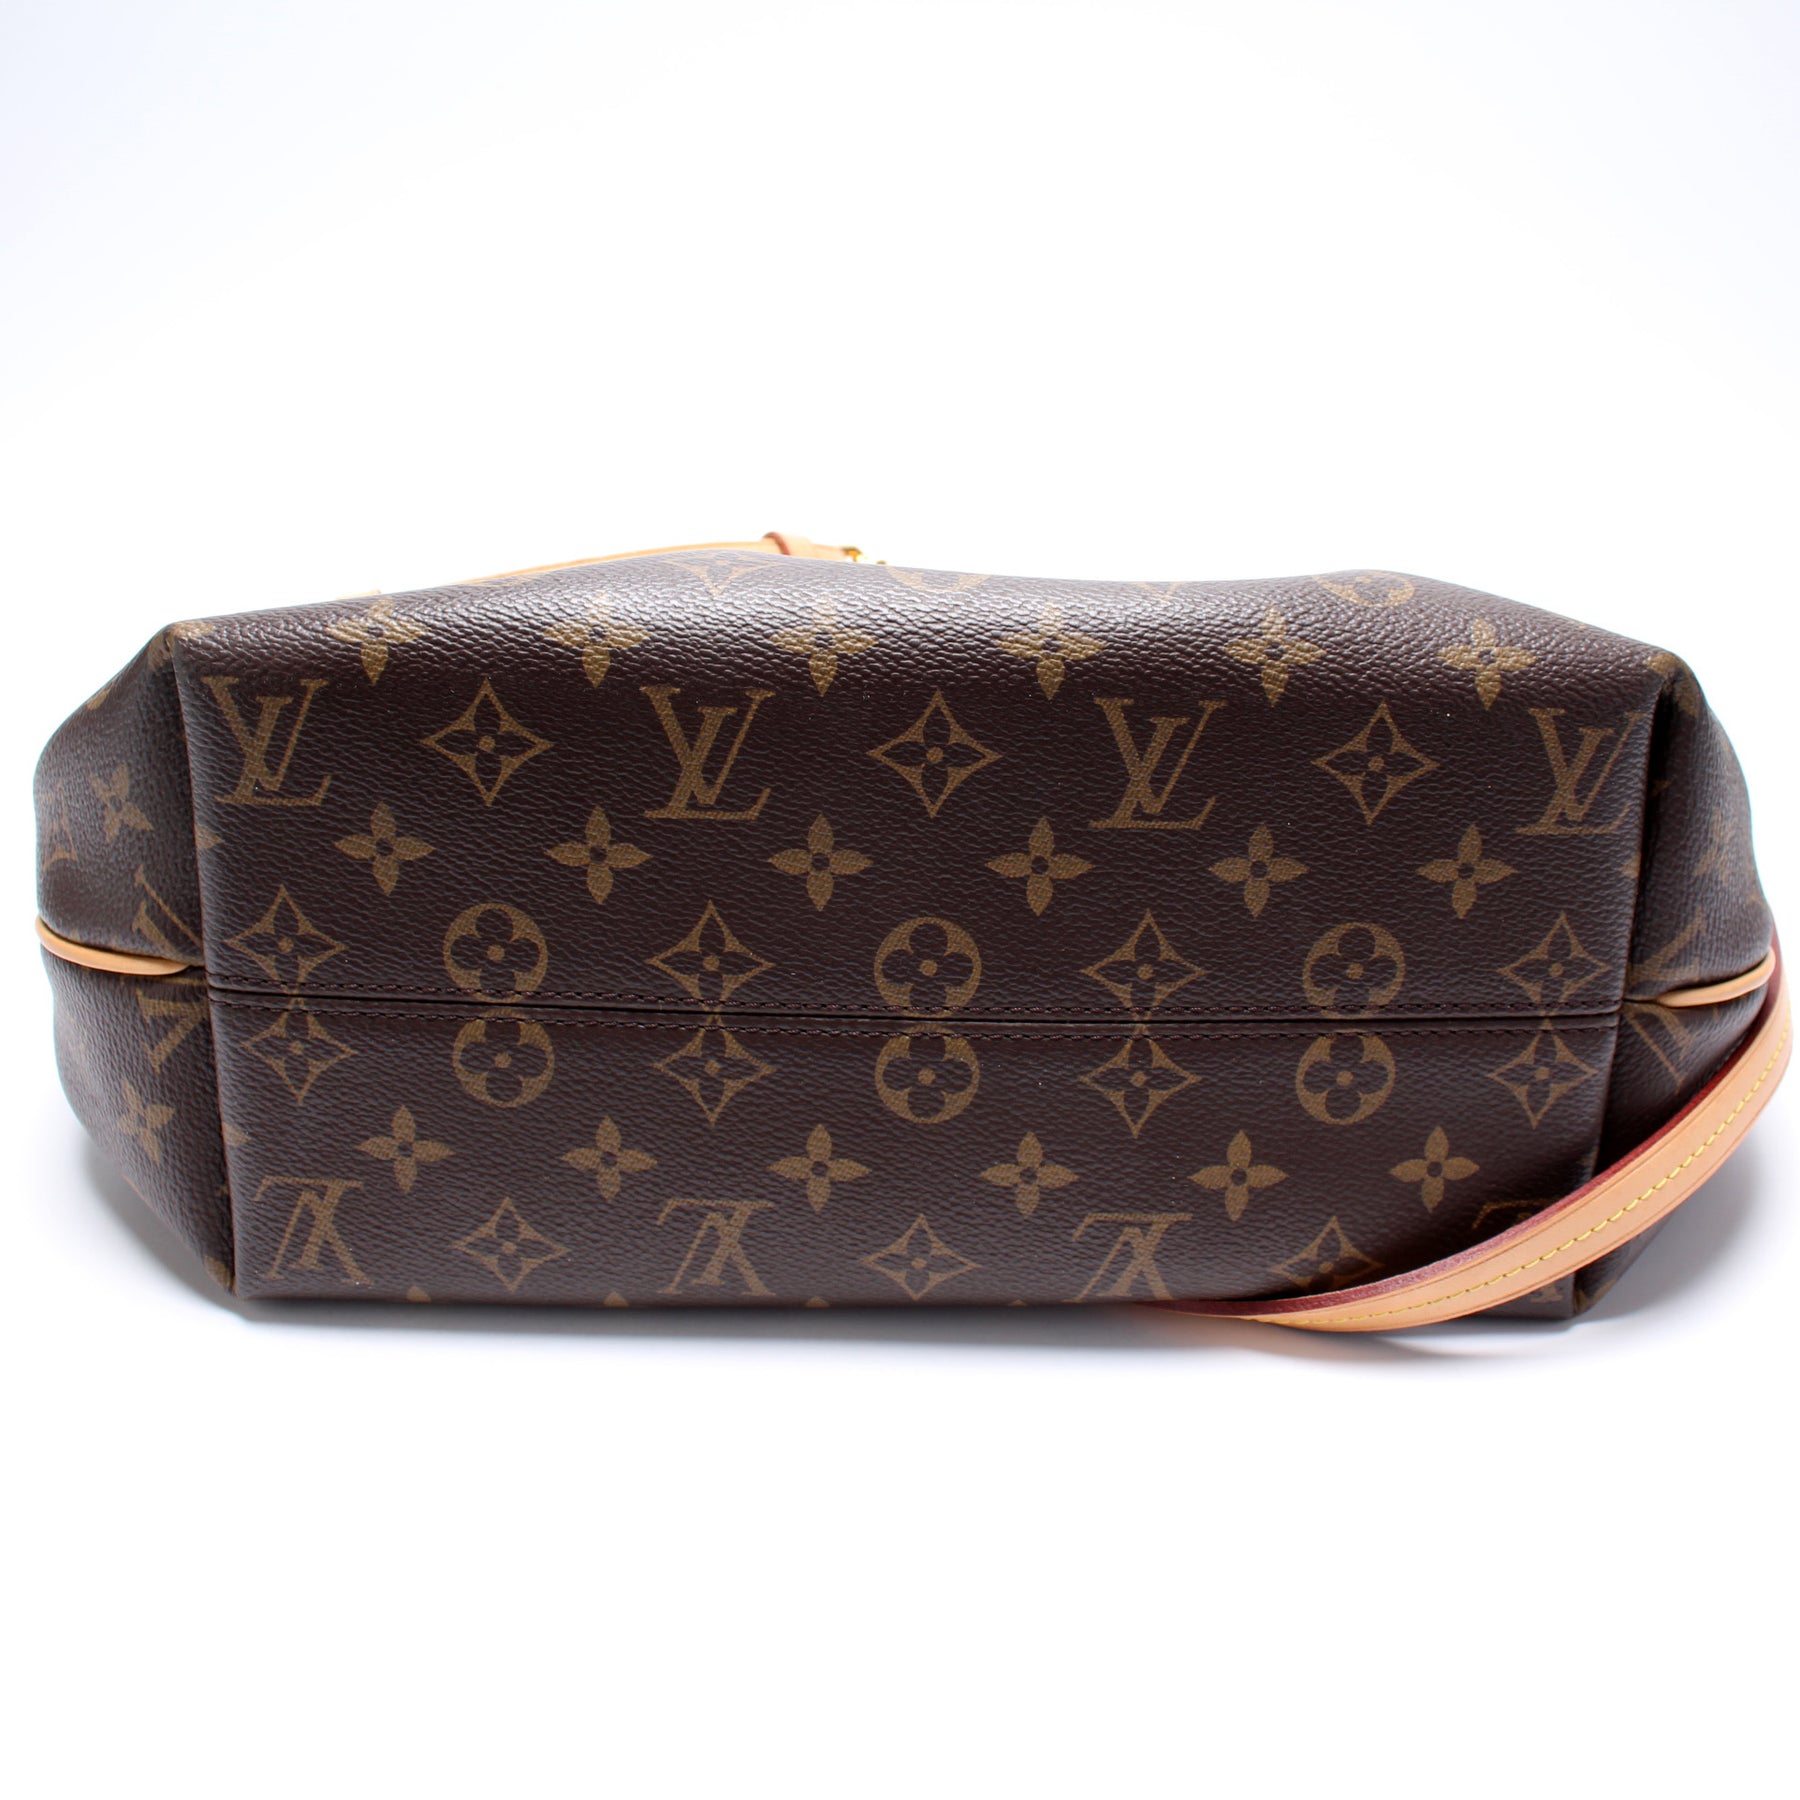 Meet the Louis Vuitton Turenne MM she's in good condition and